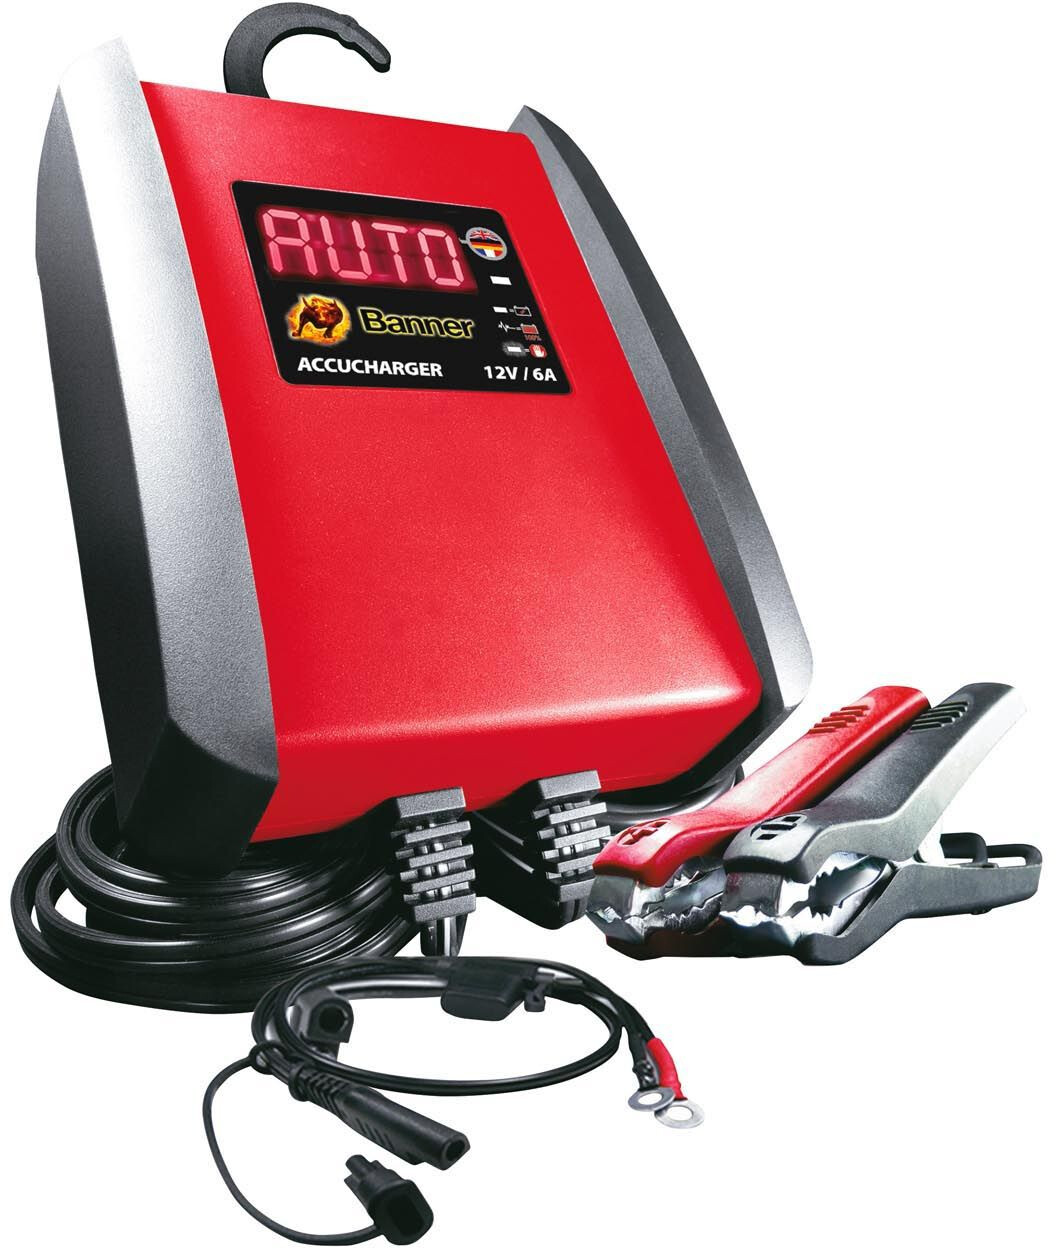 Banner Accucharger 12V 6A ab 90,45 €